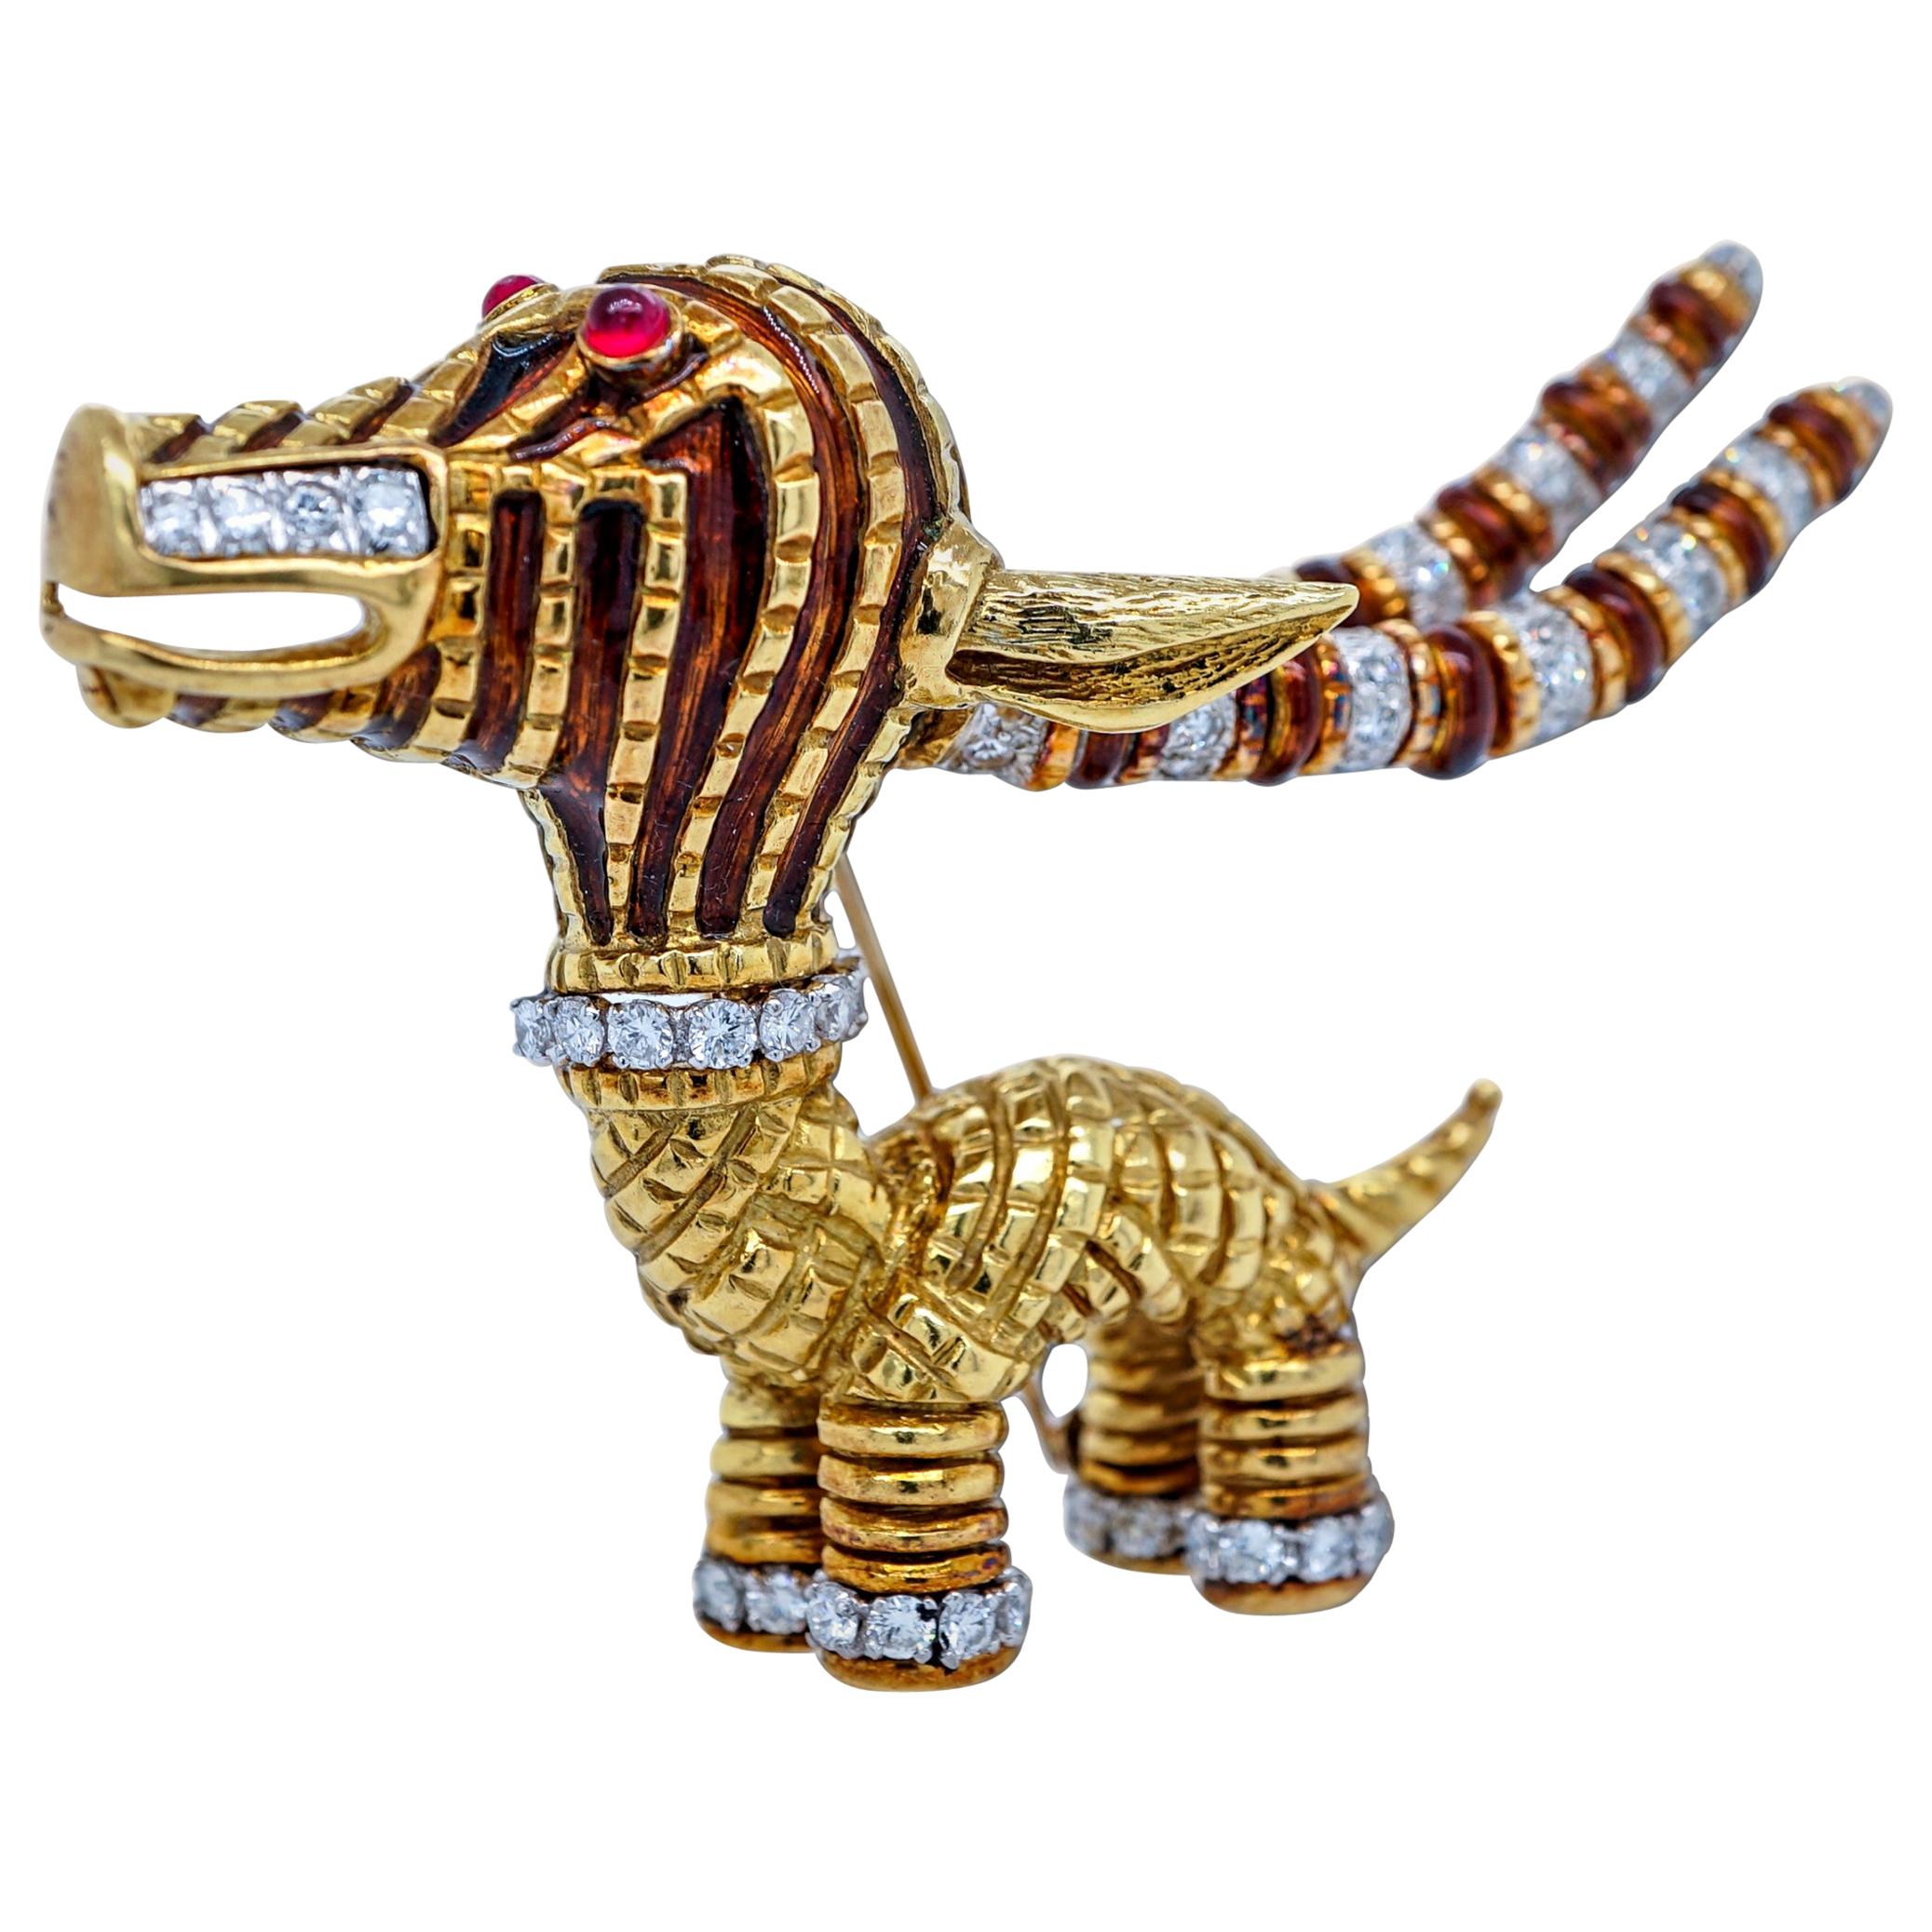 A gold, enamel and diamond brooch inspired by African art and ceremonial objects, designed by Also Cipullo for Tiffany & Co. in the late 1960s and offered by Select Antique Jewelry Inc.